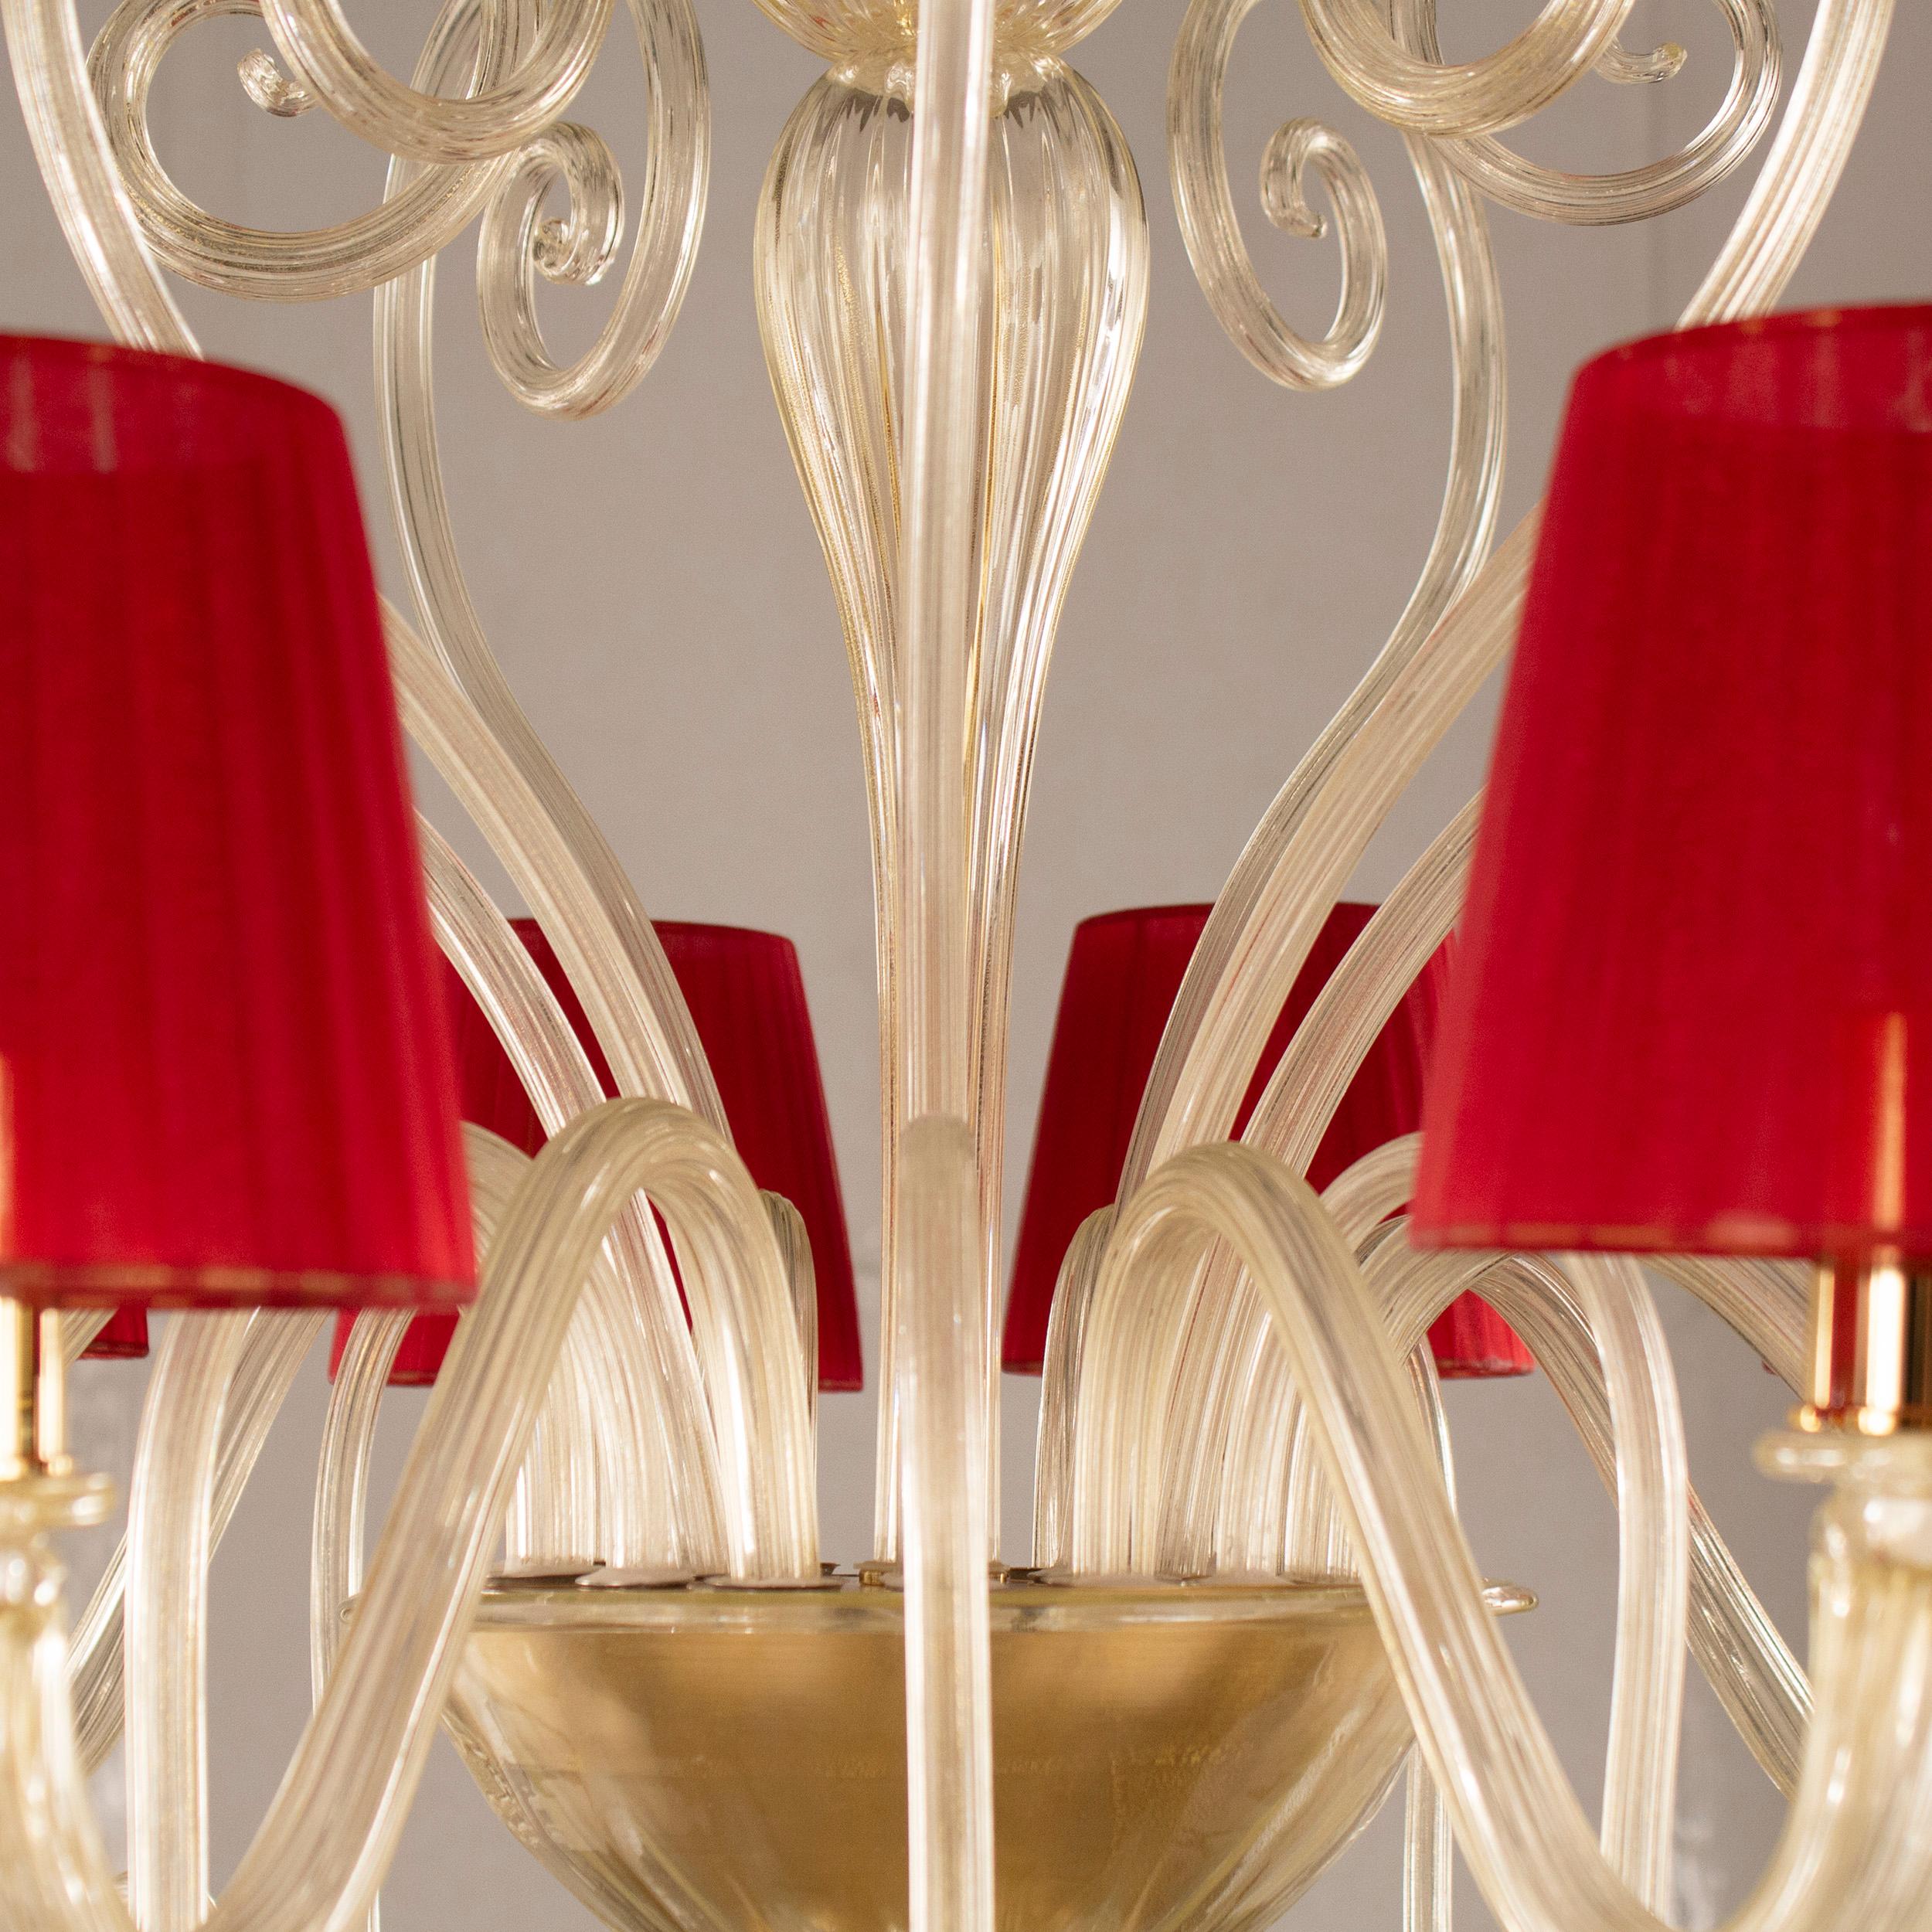 Contemporary Artistic Chandelier 8 Arms Golden Leaf Murano Glass and Lampshades by Multiforme For Sale